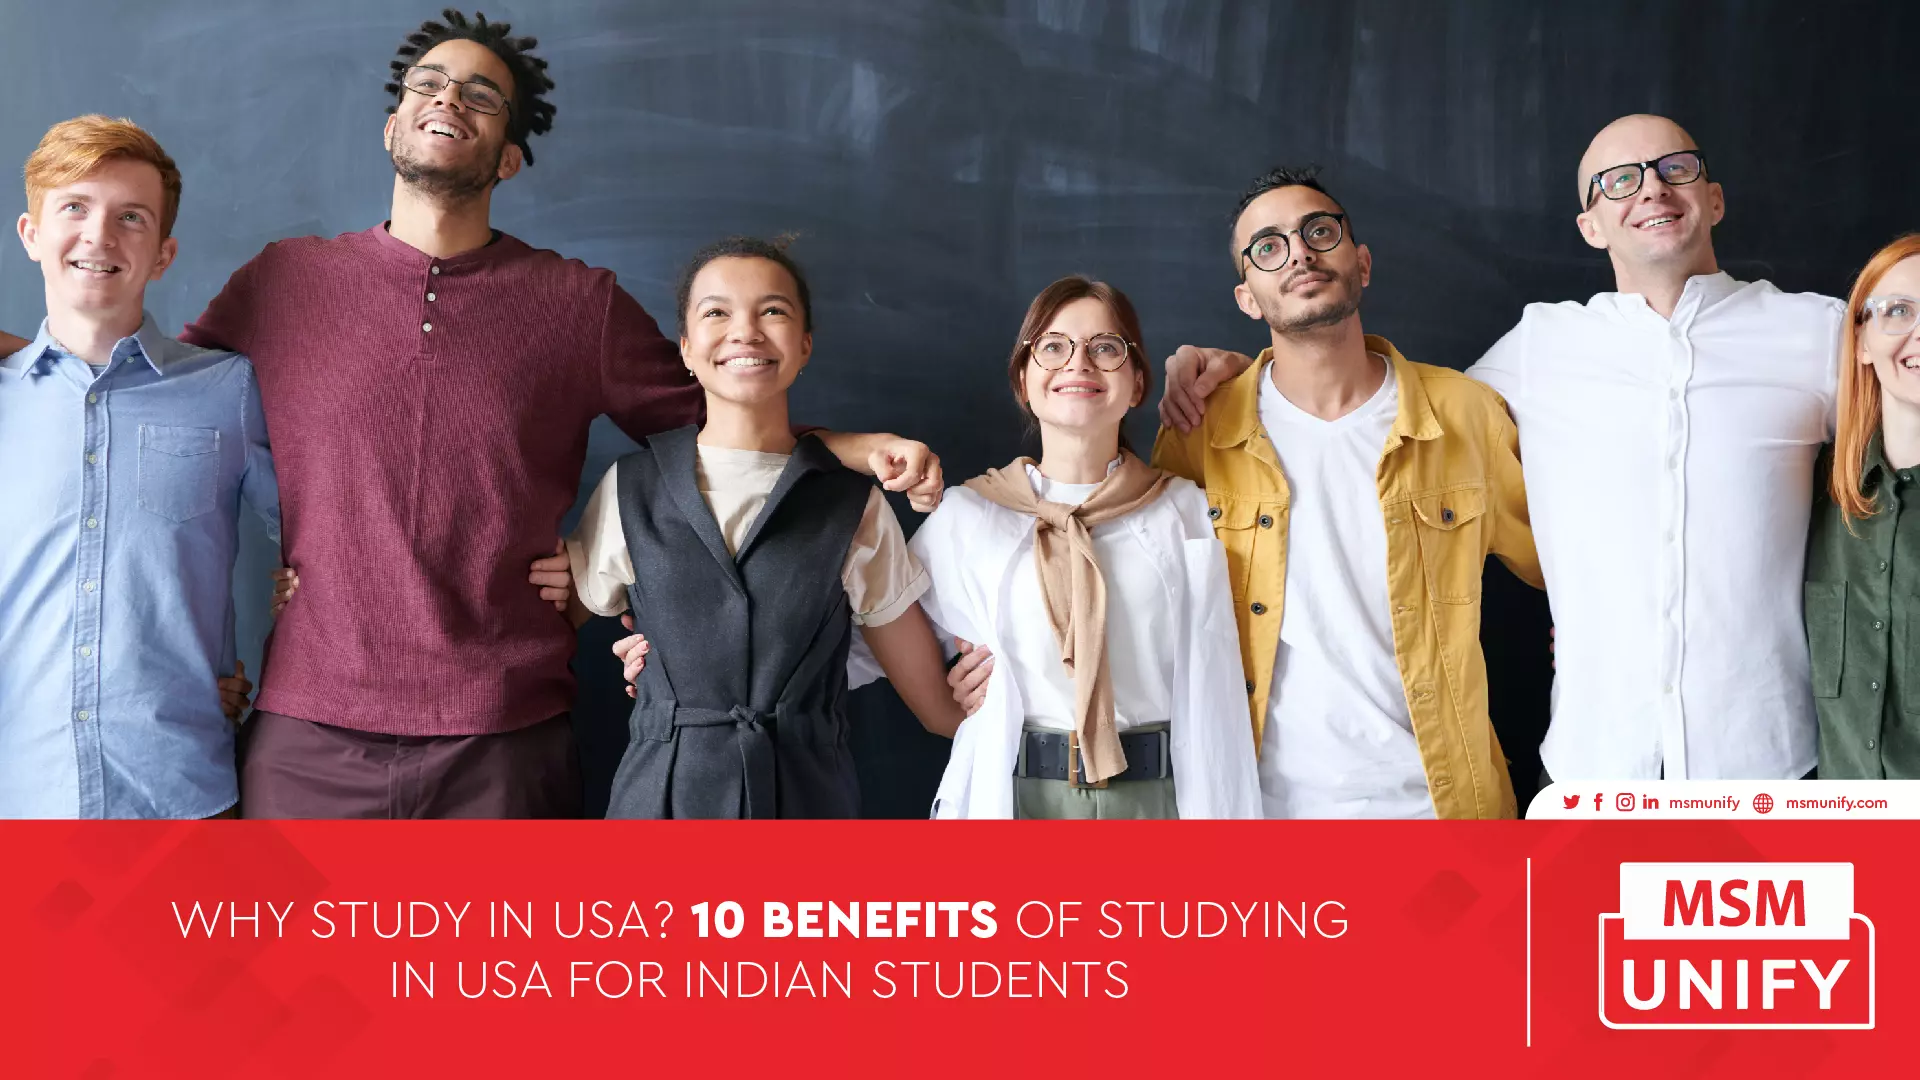 112522 MSM Unify  Why Study in USA 10 Benefits of Studying in USA for Indian Students 01